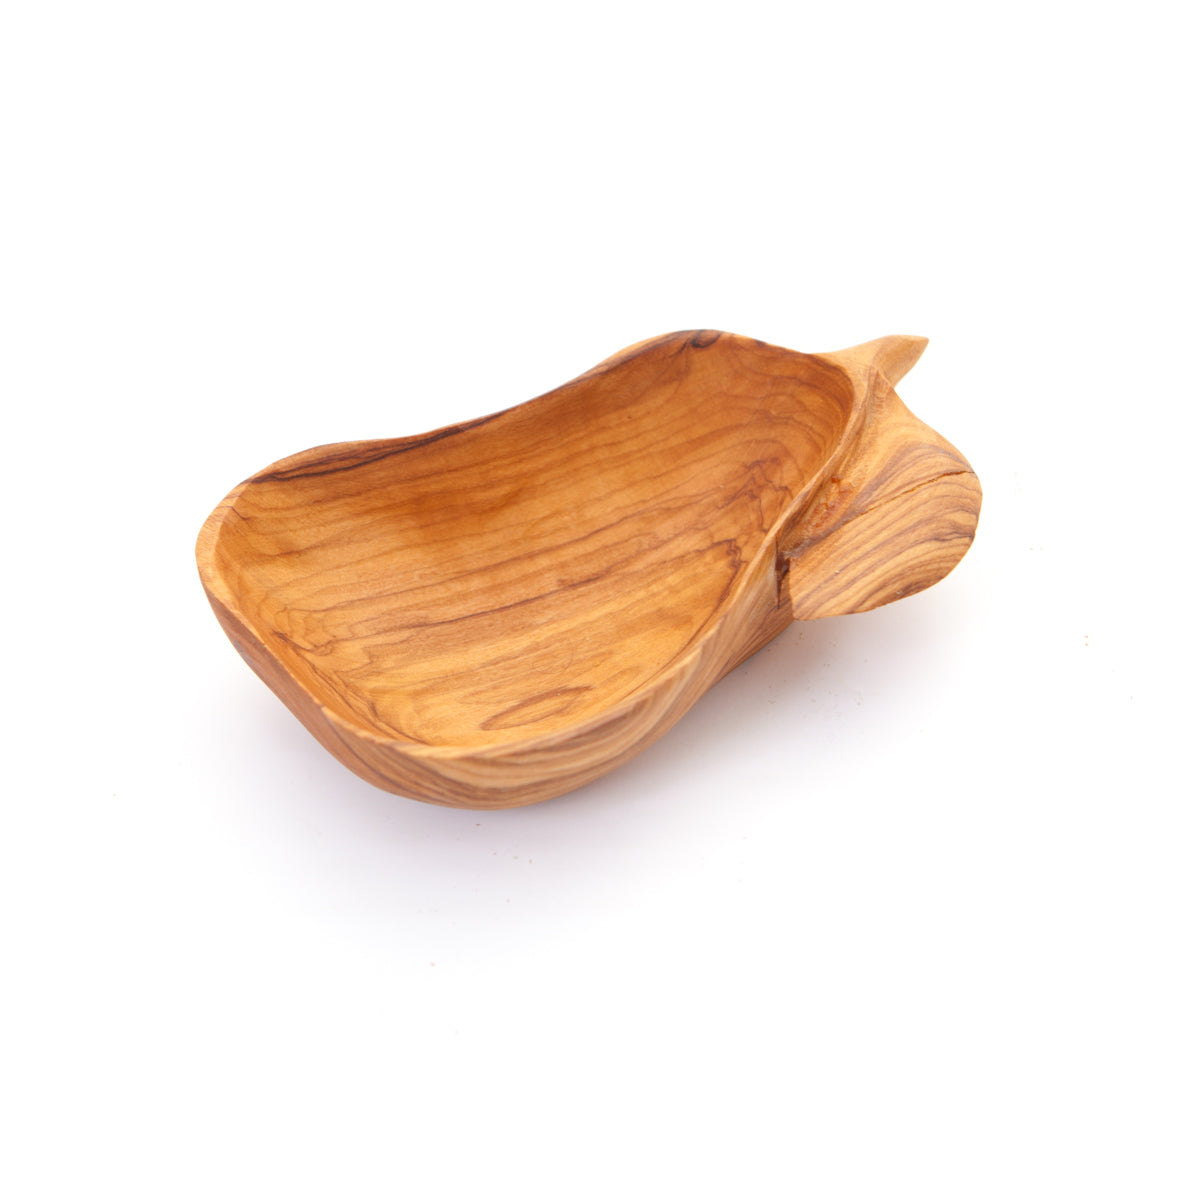 Carved Wooden Pear Shaped Plate